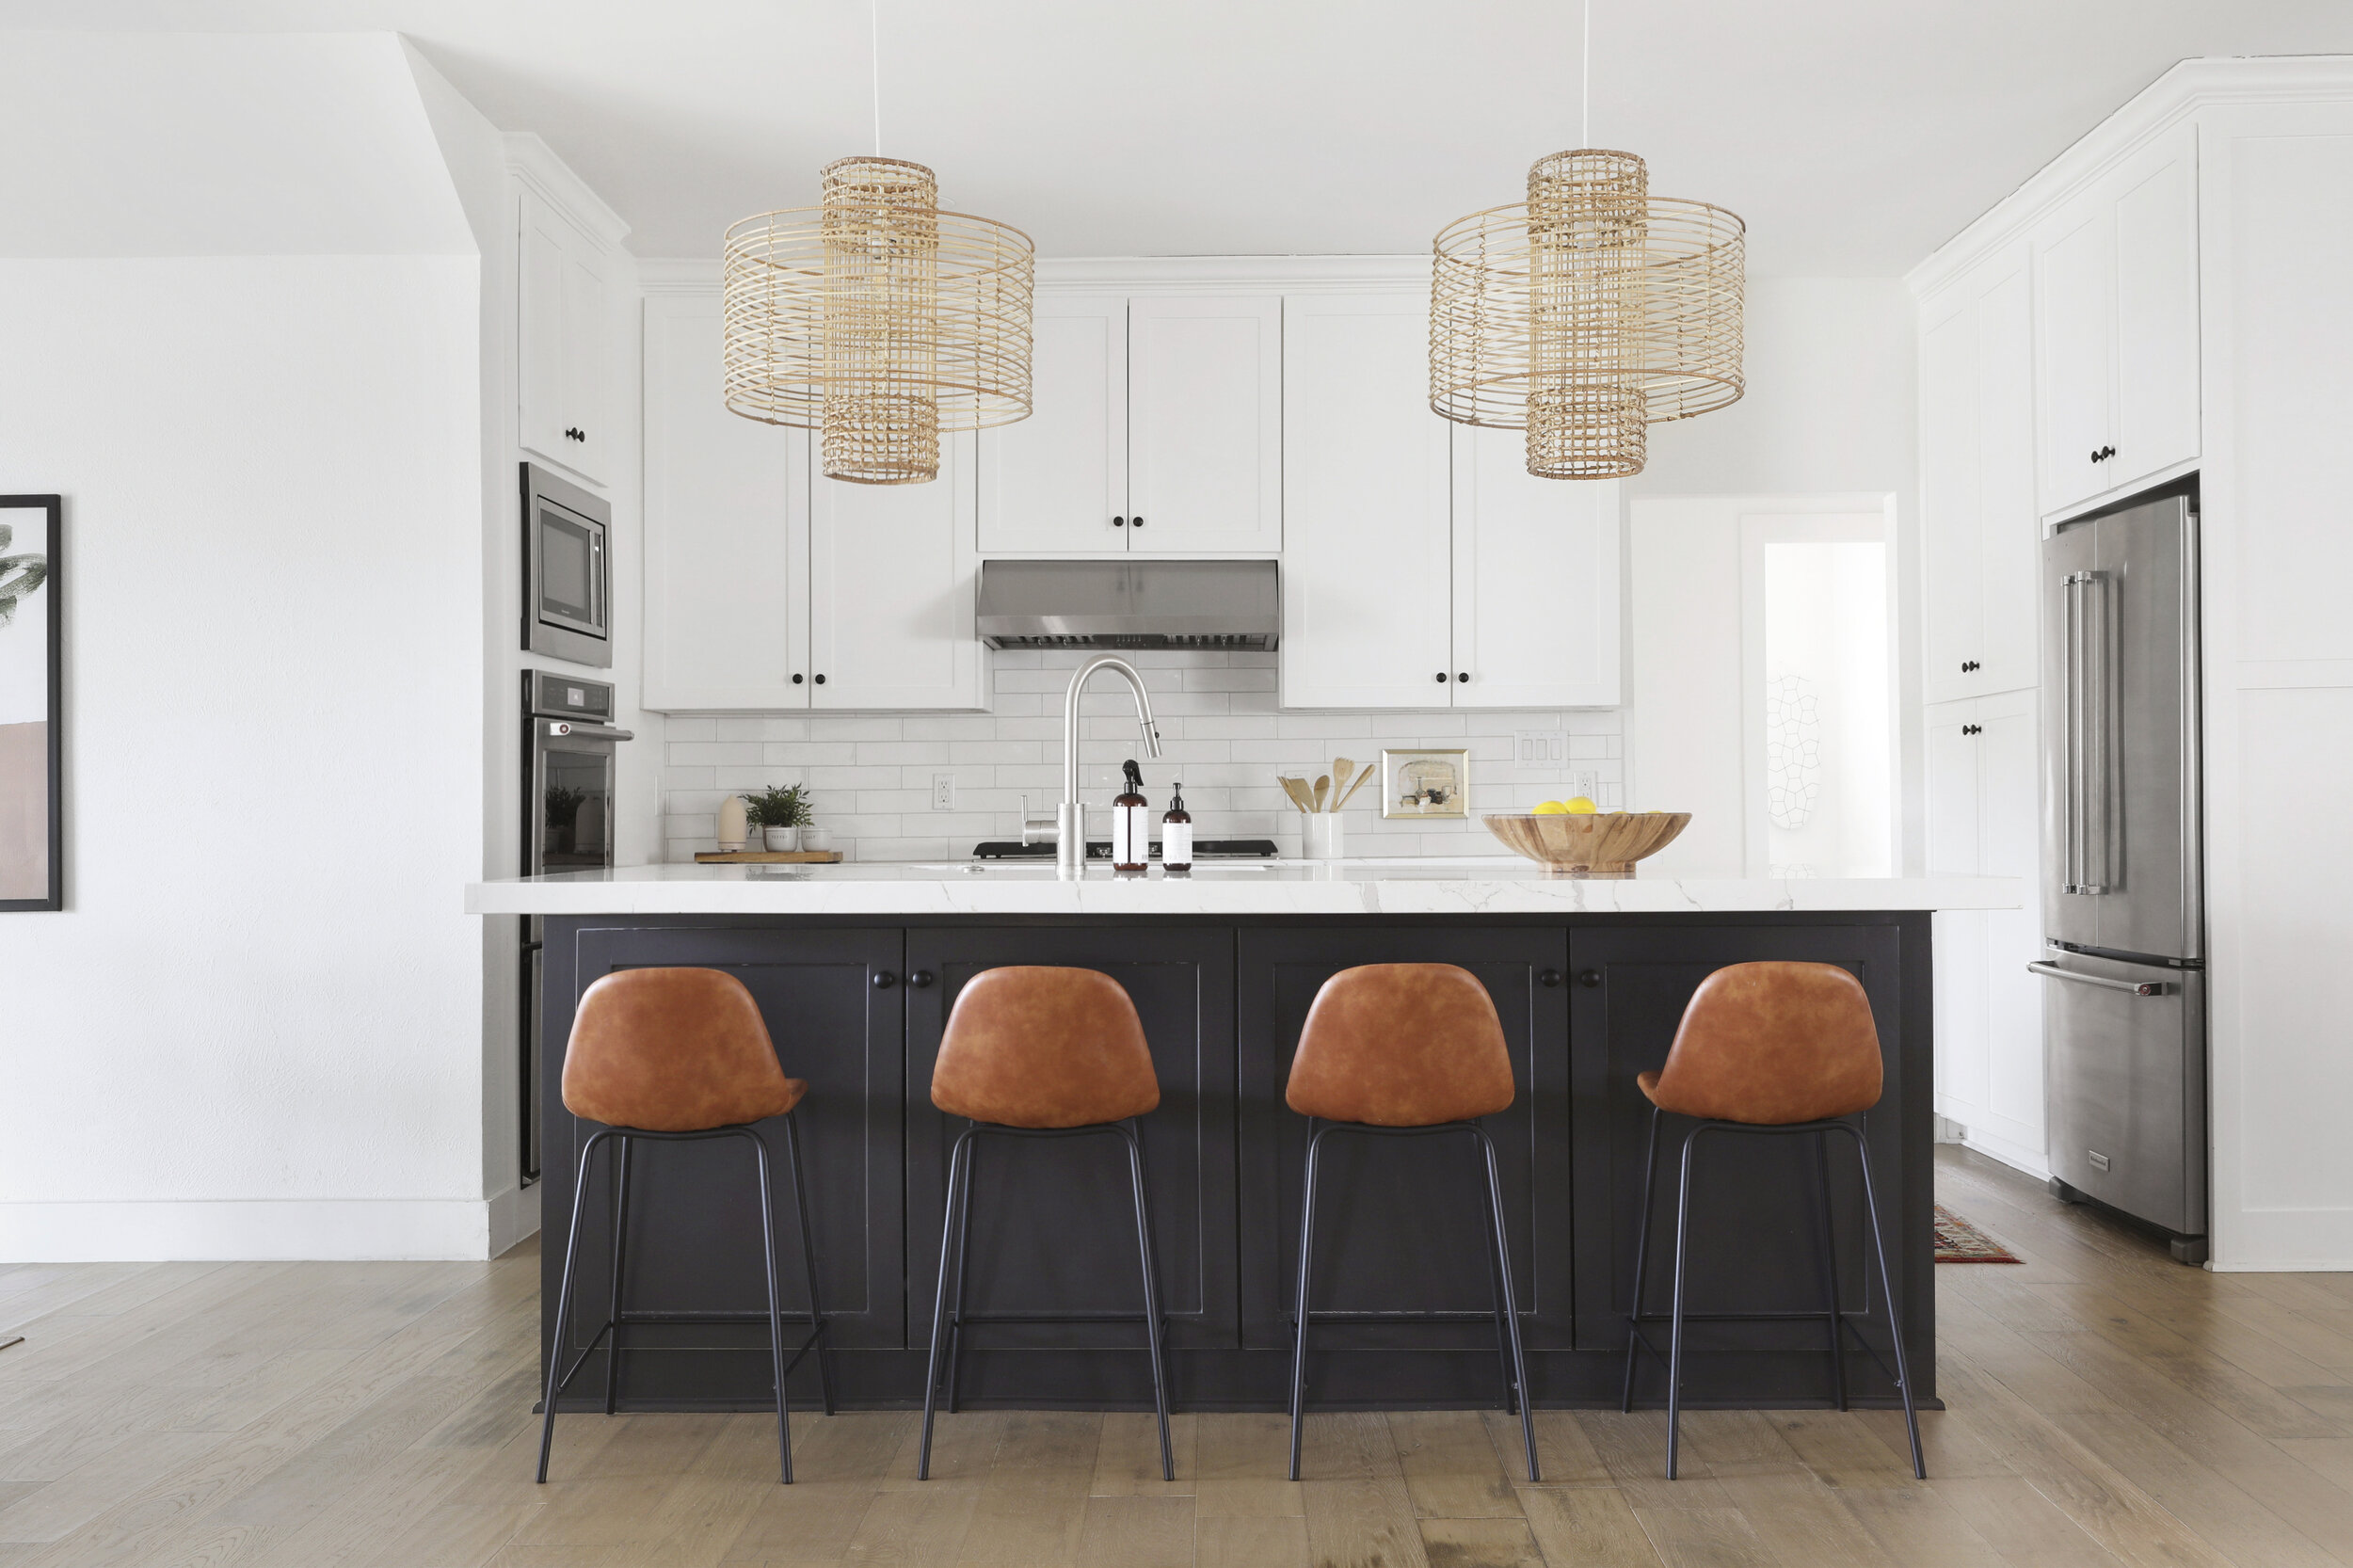 Pendants // Counter Stools (mine are out of stock, but these are better) // Faucet // Microwave // Ovens // Refrigerator // Wood Bowl (similar)